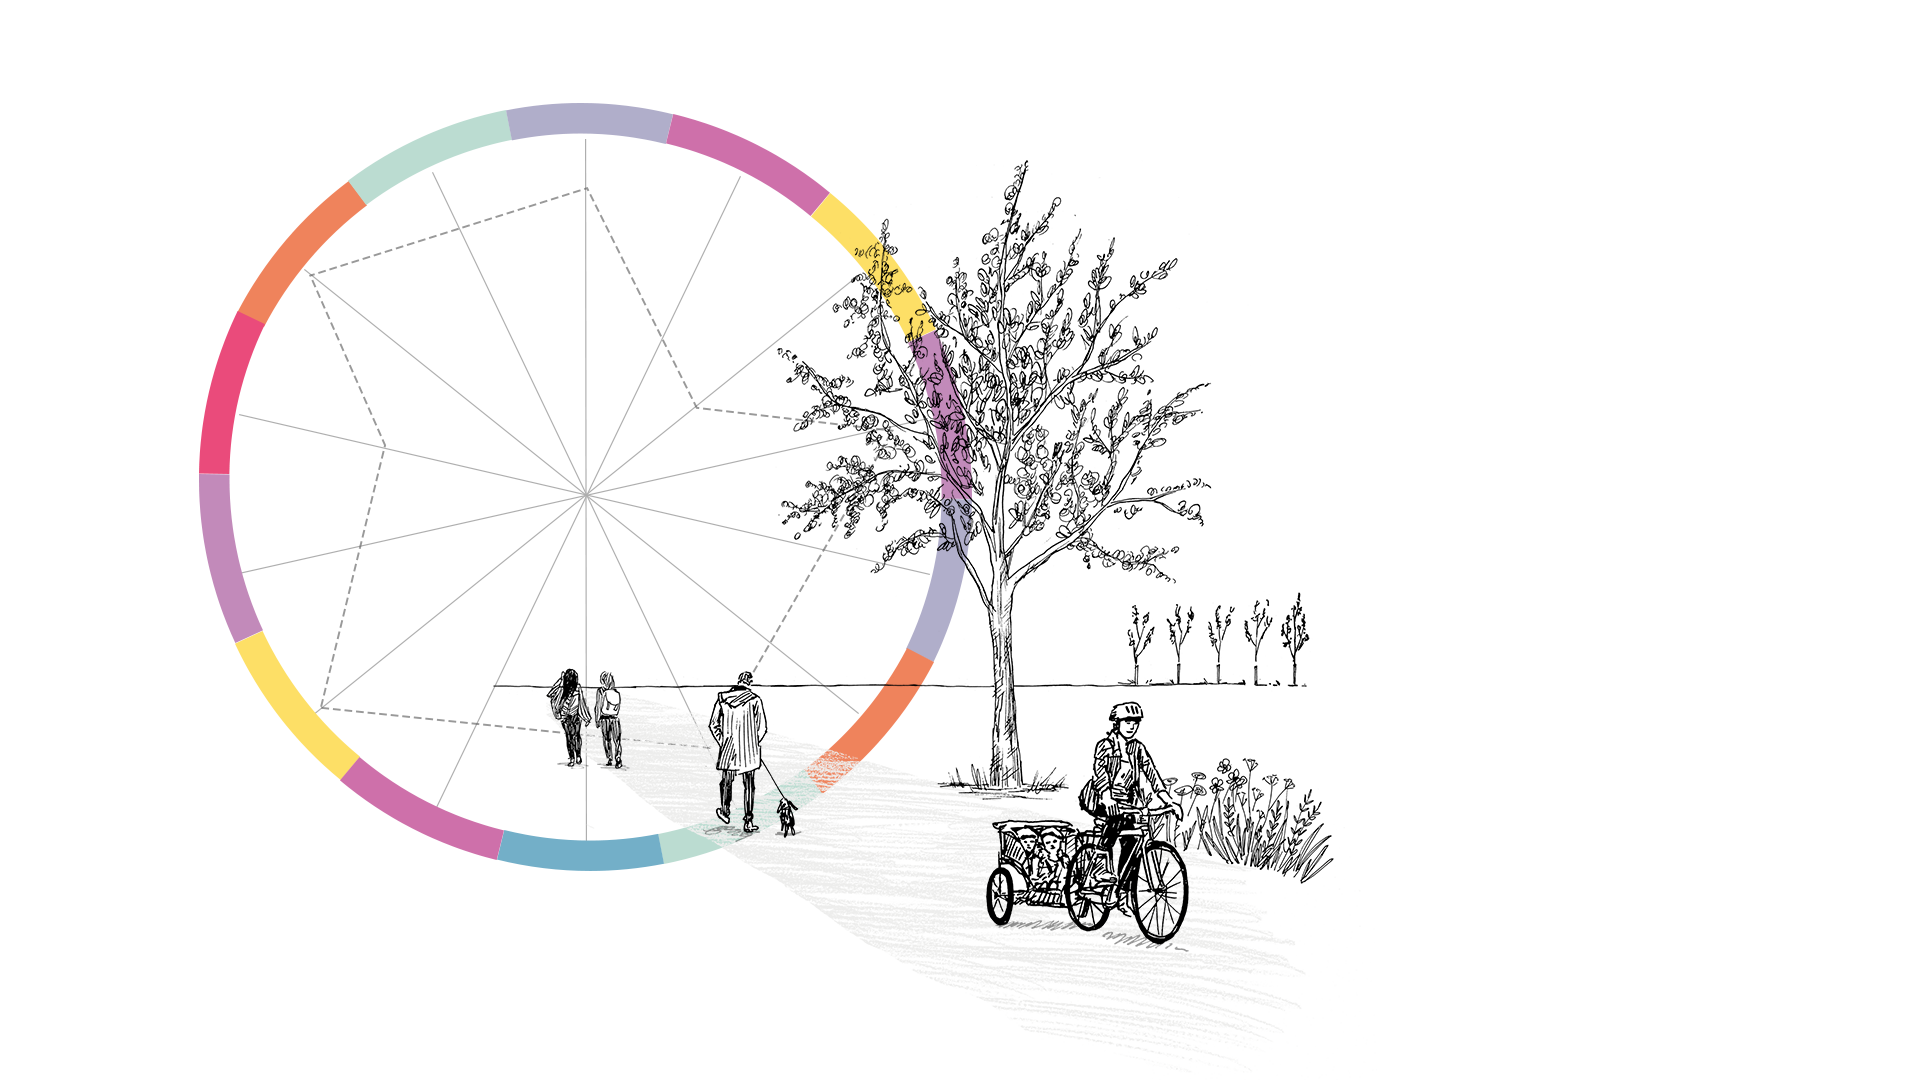 An illustration of the Place Standard wheel in the background. People walking and cycling along a path in the foreground.